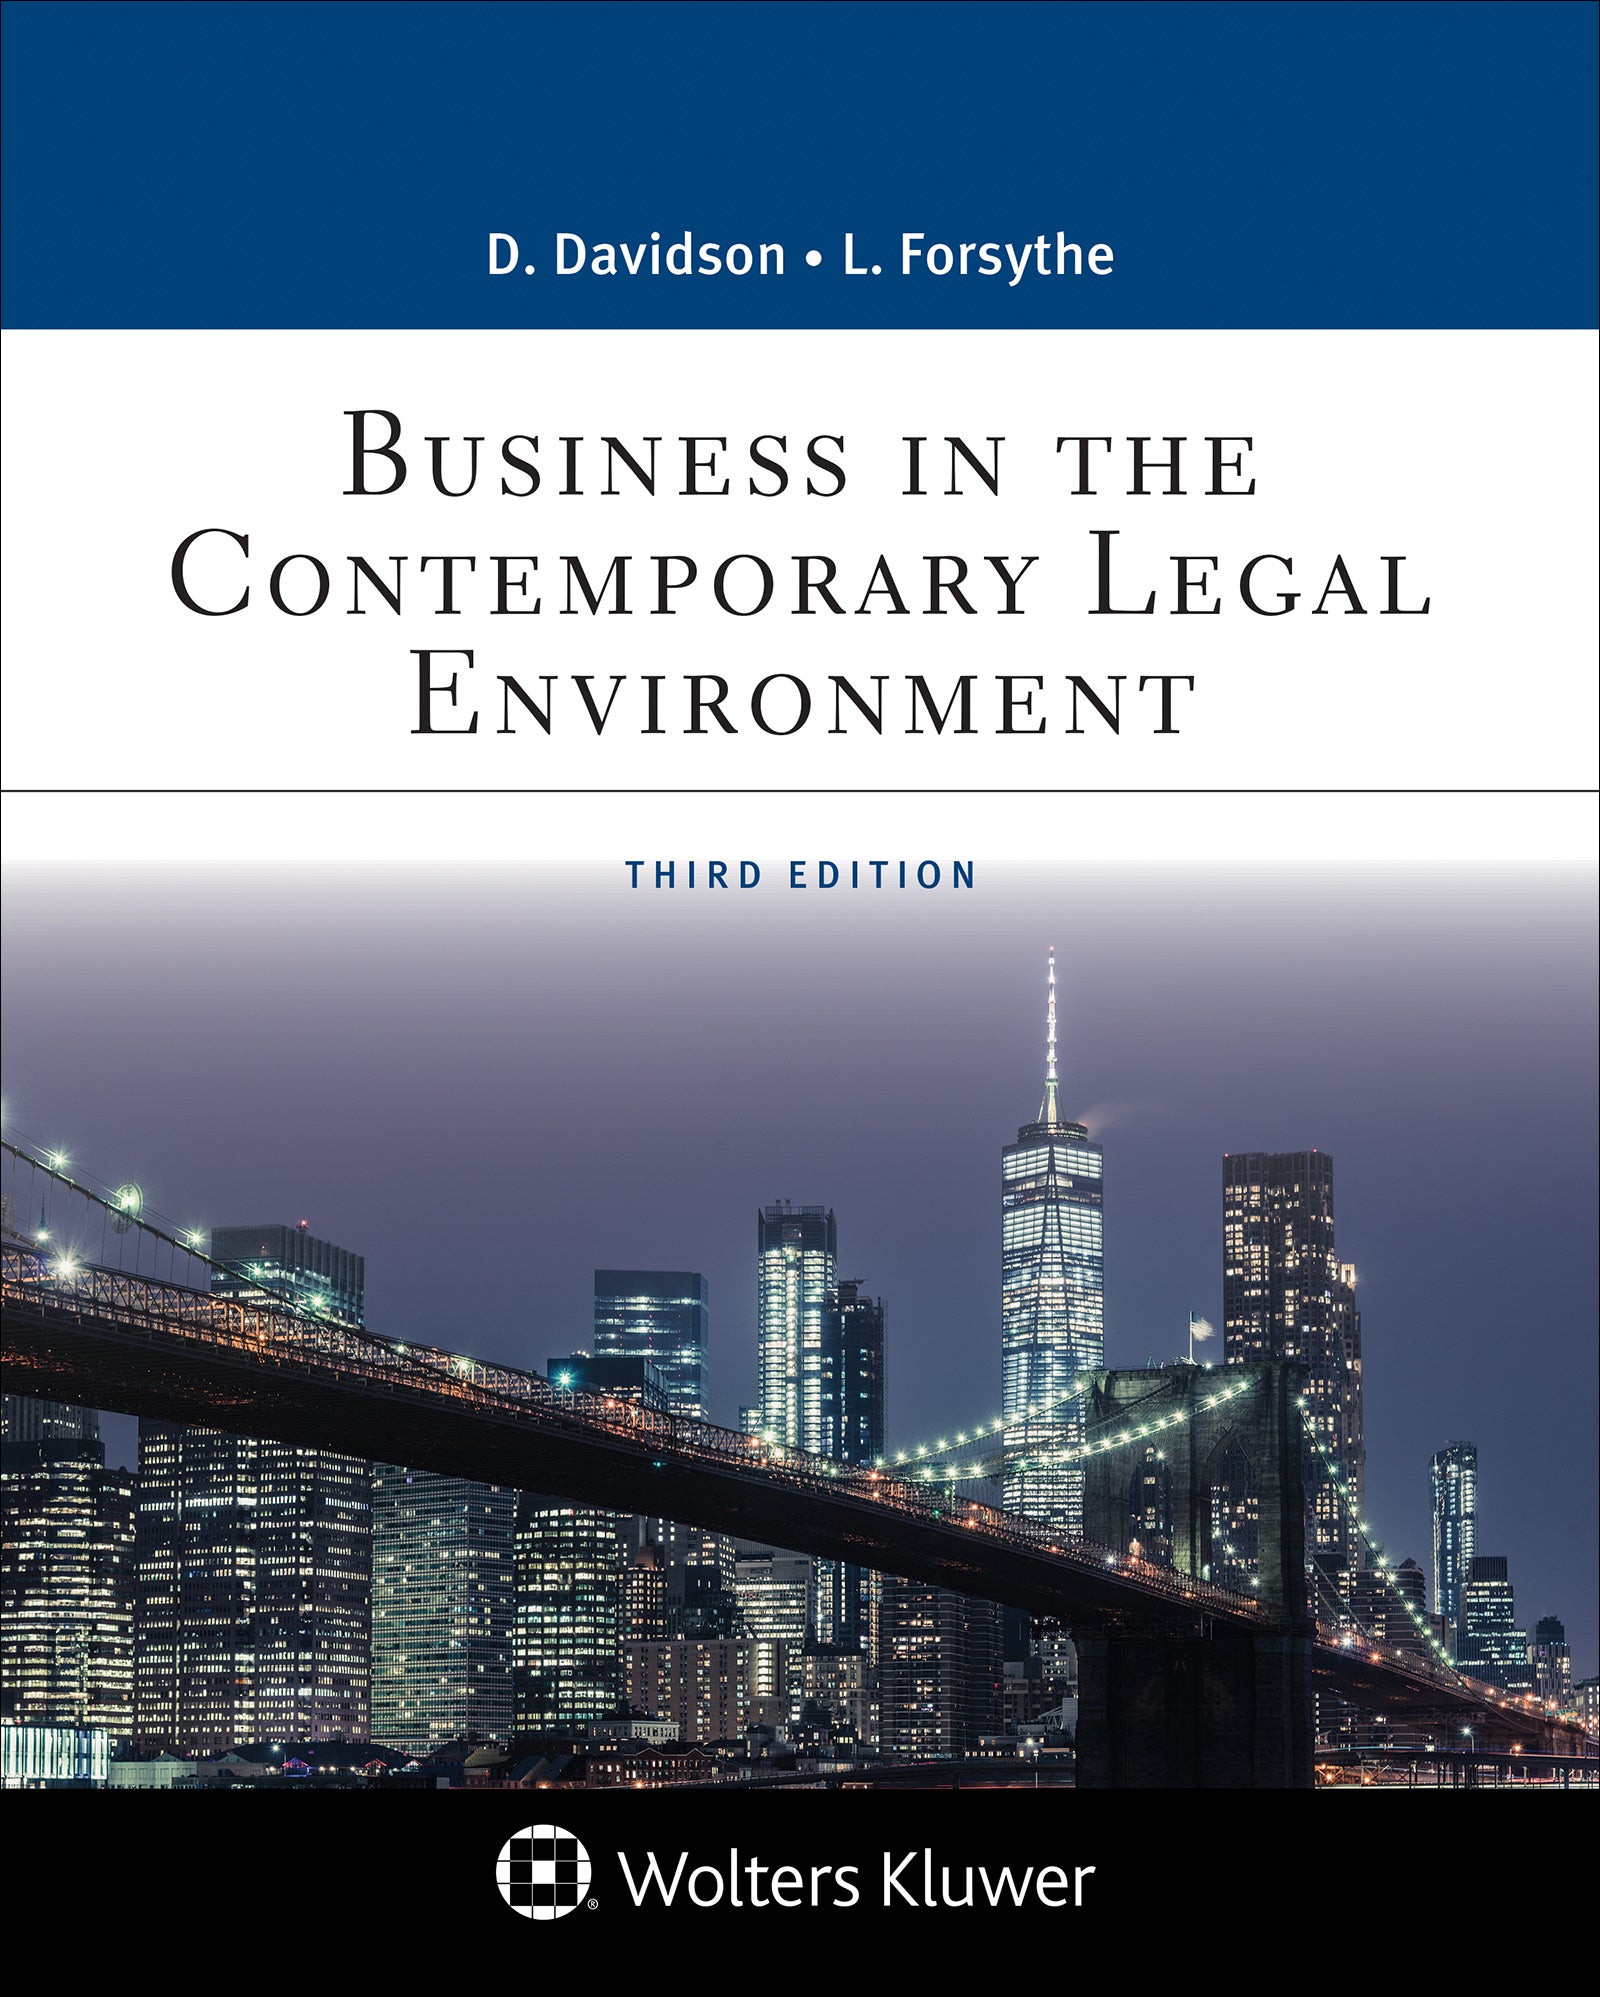 The Legal and Ethical Environment of Business, Second Edition